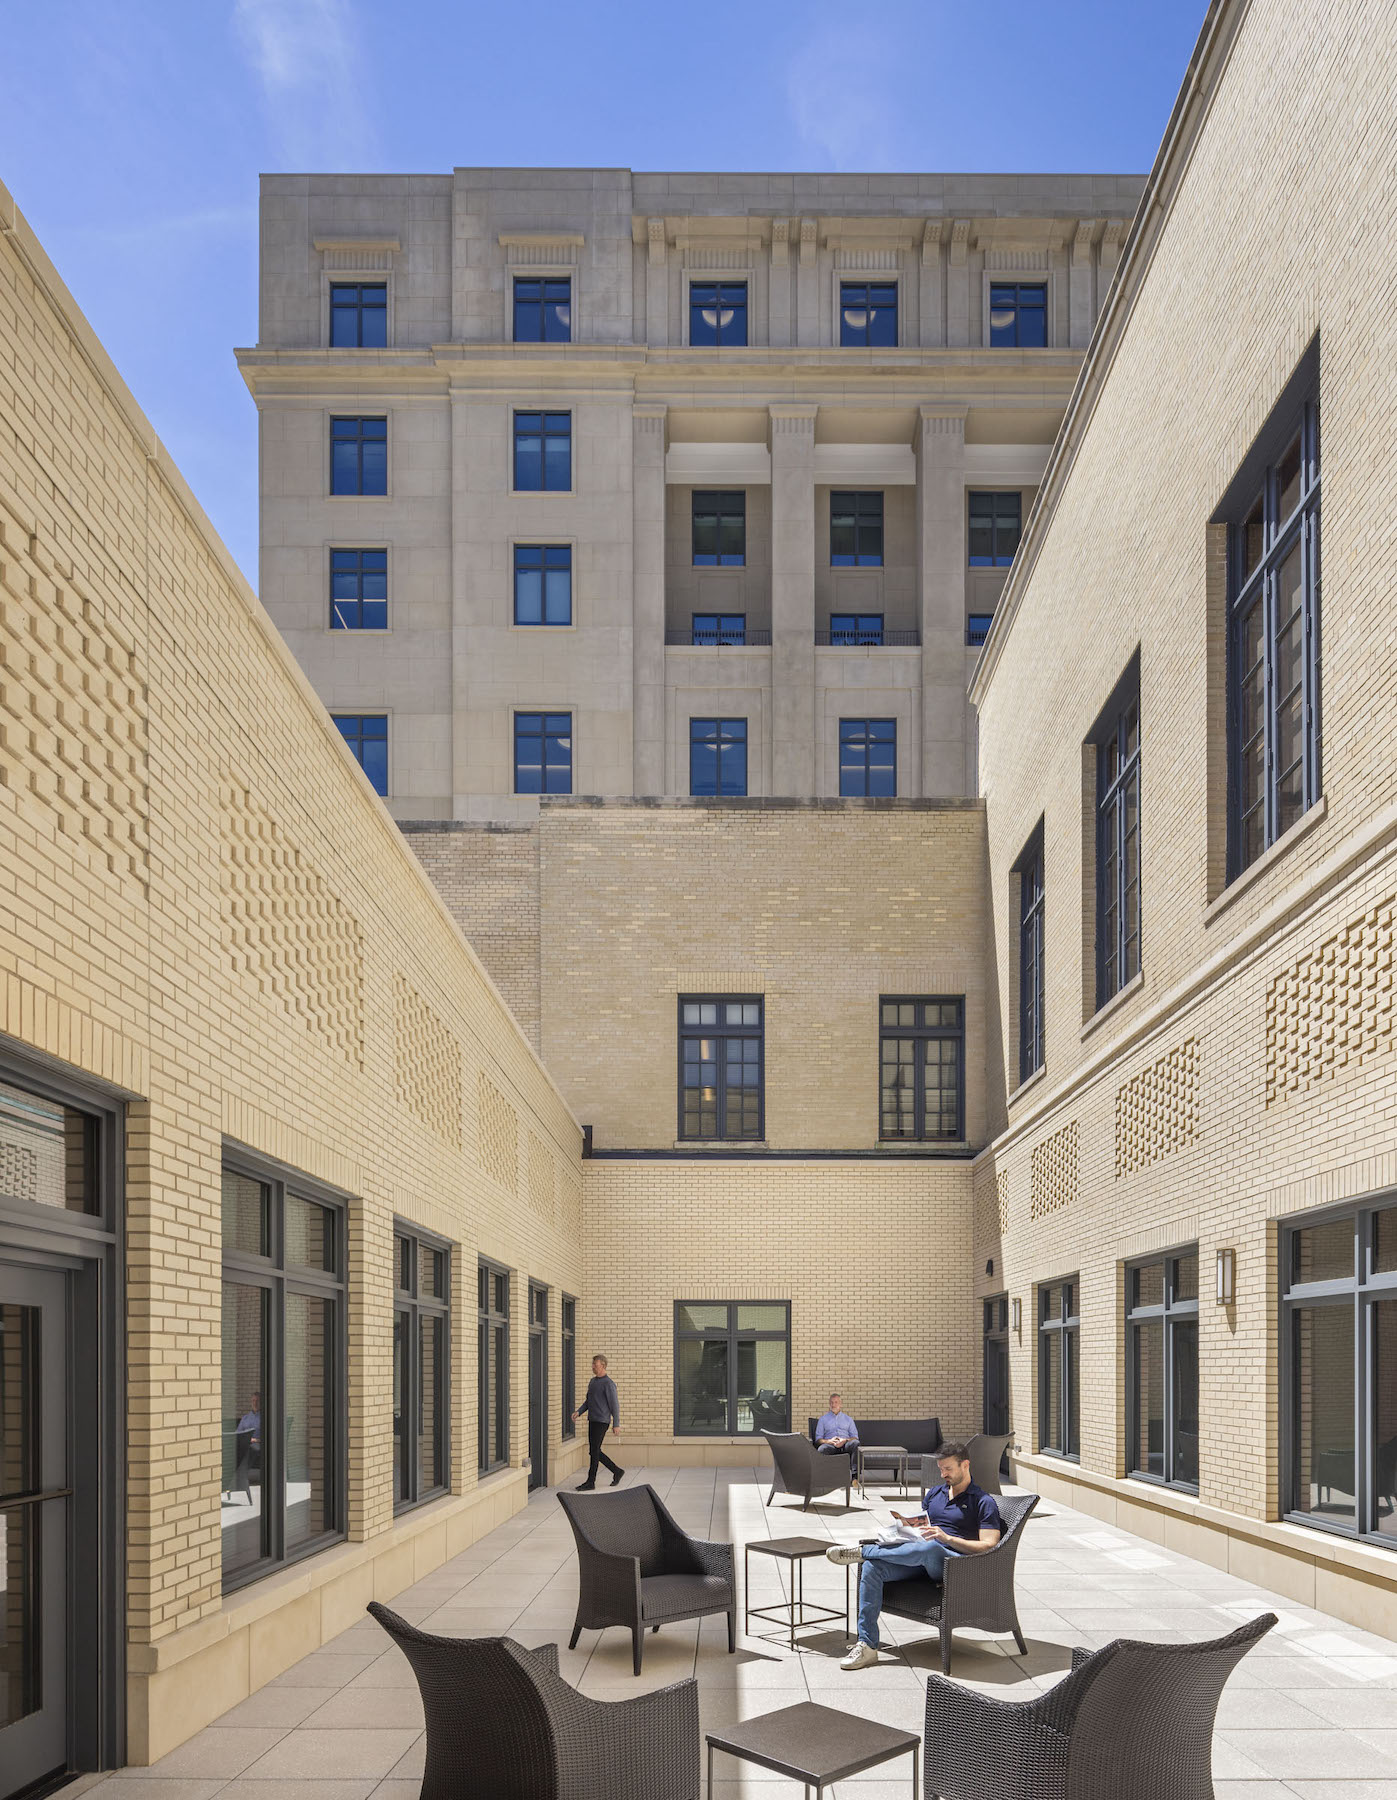 A historic courthouse in Charlotte is updated and expanded by Robert A.M. Stern Architects